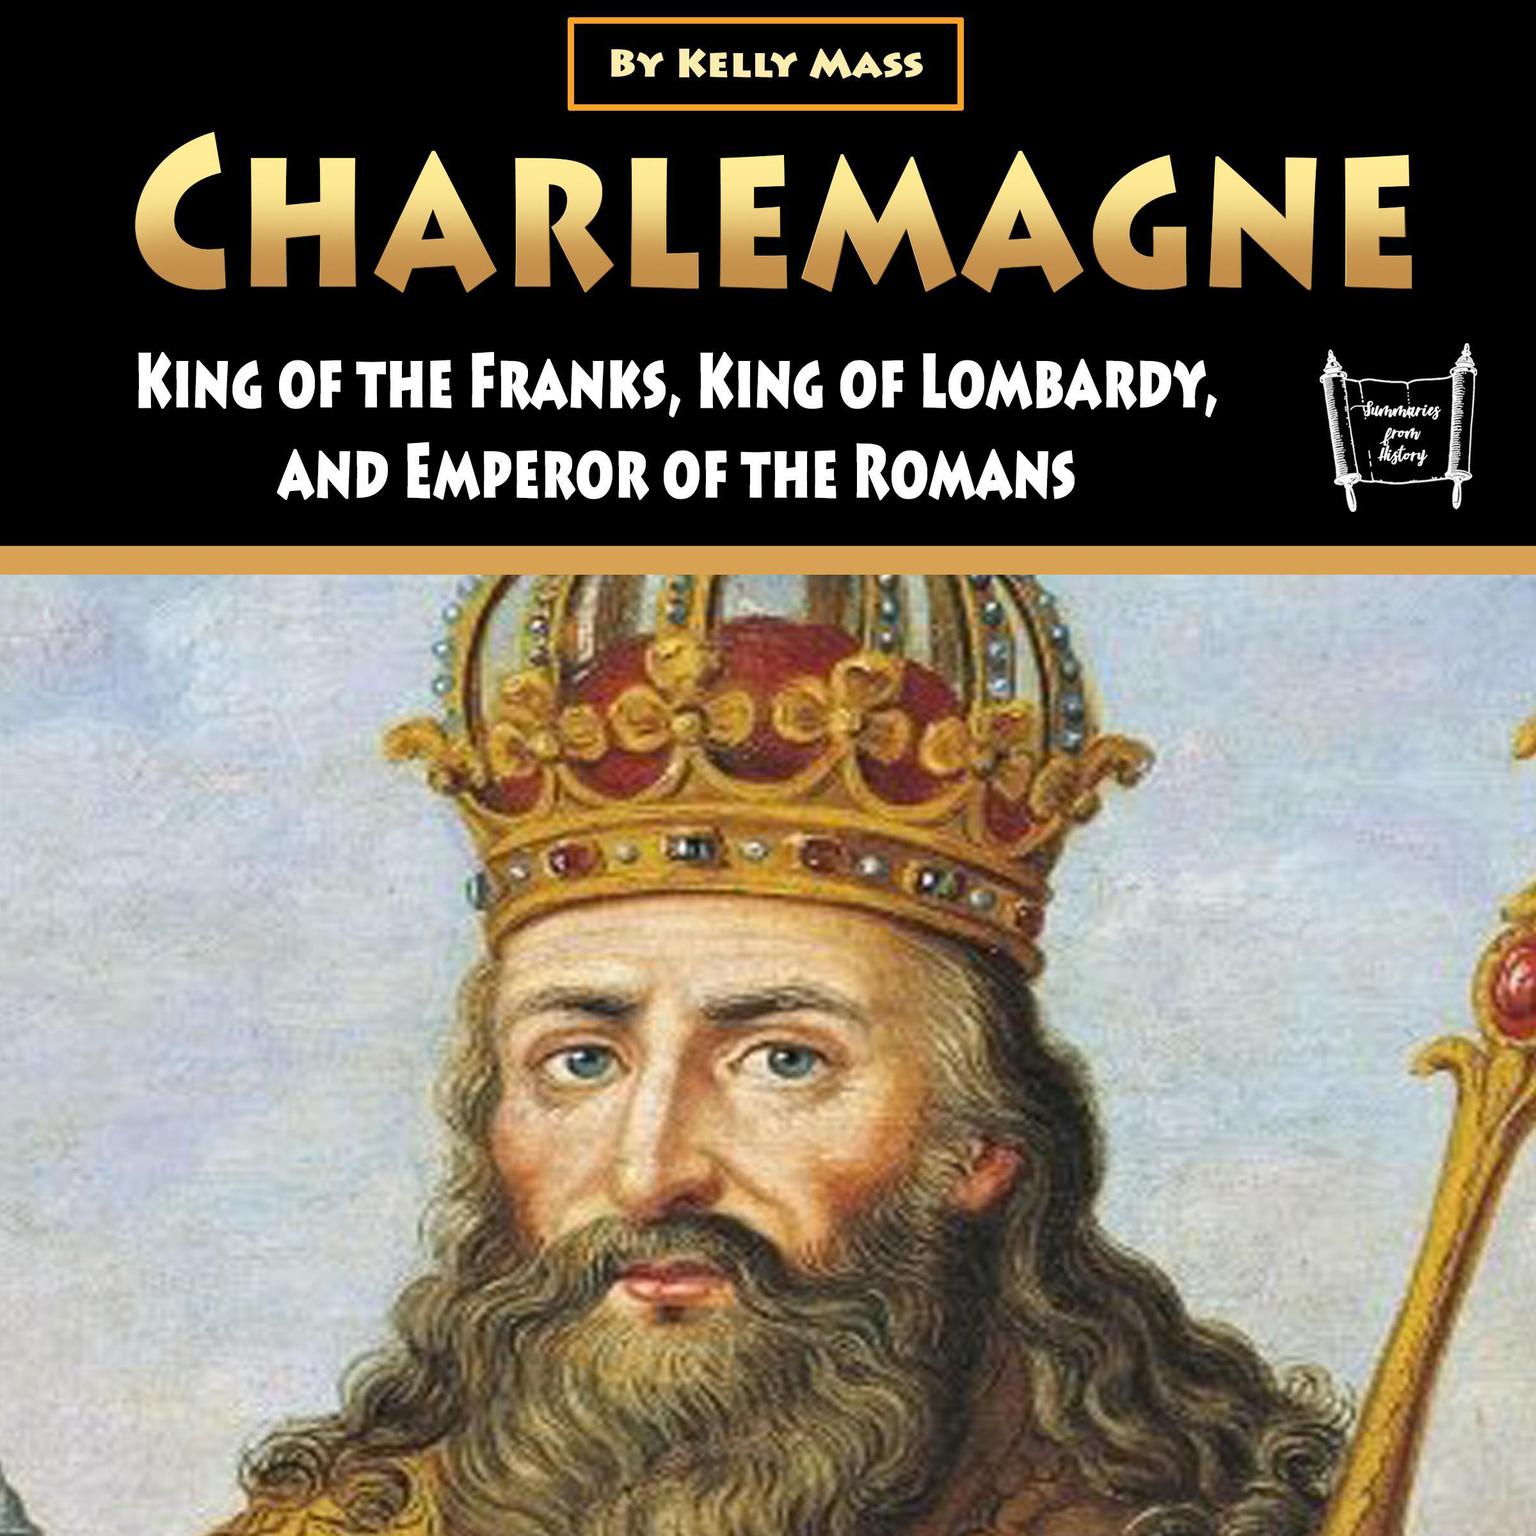 Charlemagne: King of the Franks, King of Lombardy, and Emperor of the Romans Audiobook, by Kelly Mass